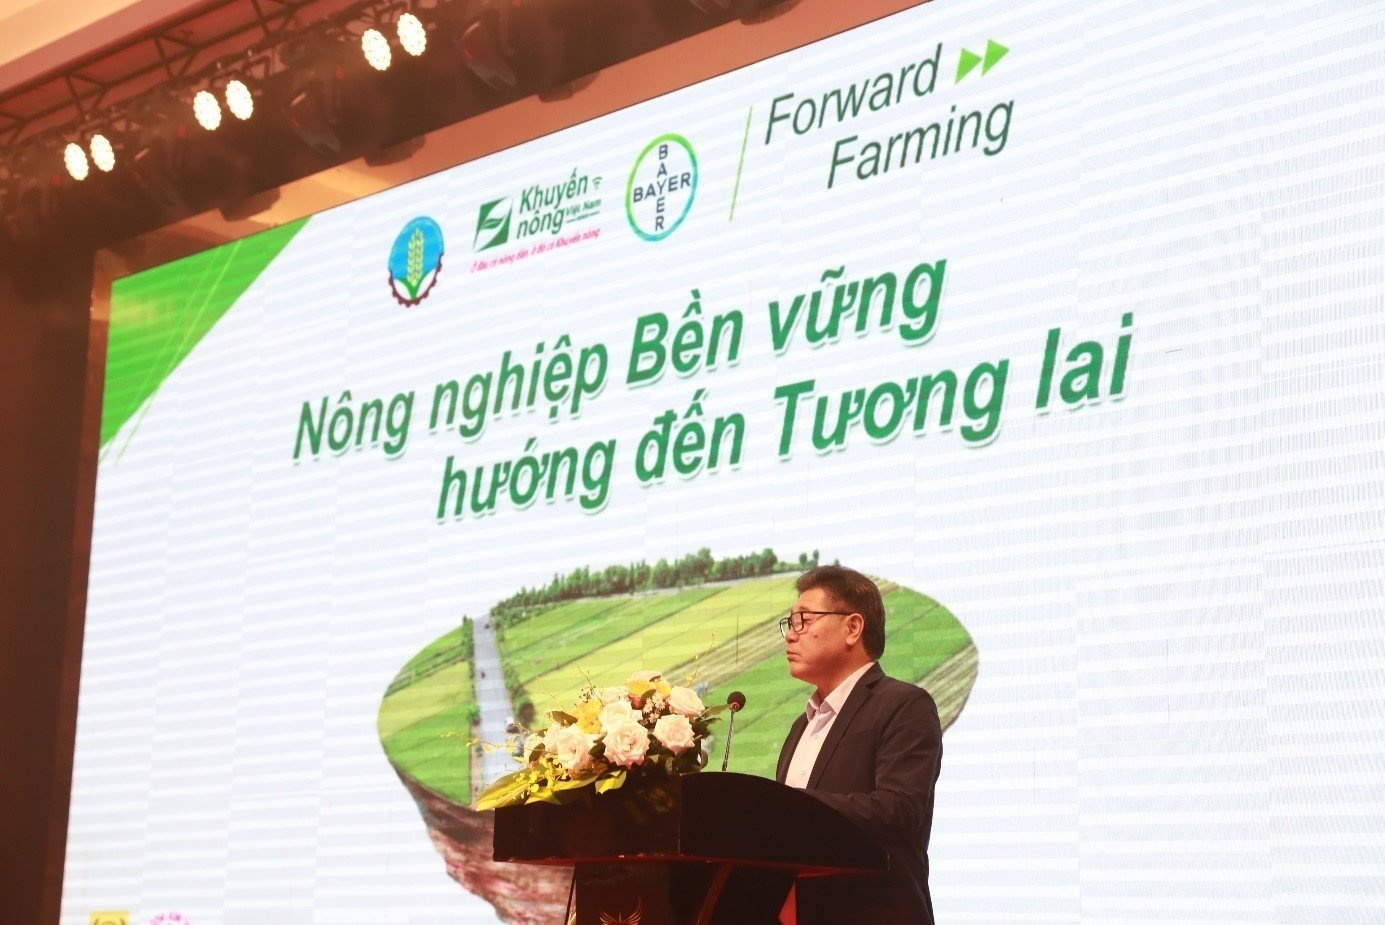 Bayer initiative embracing sustainable agriculture